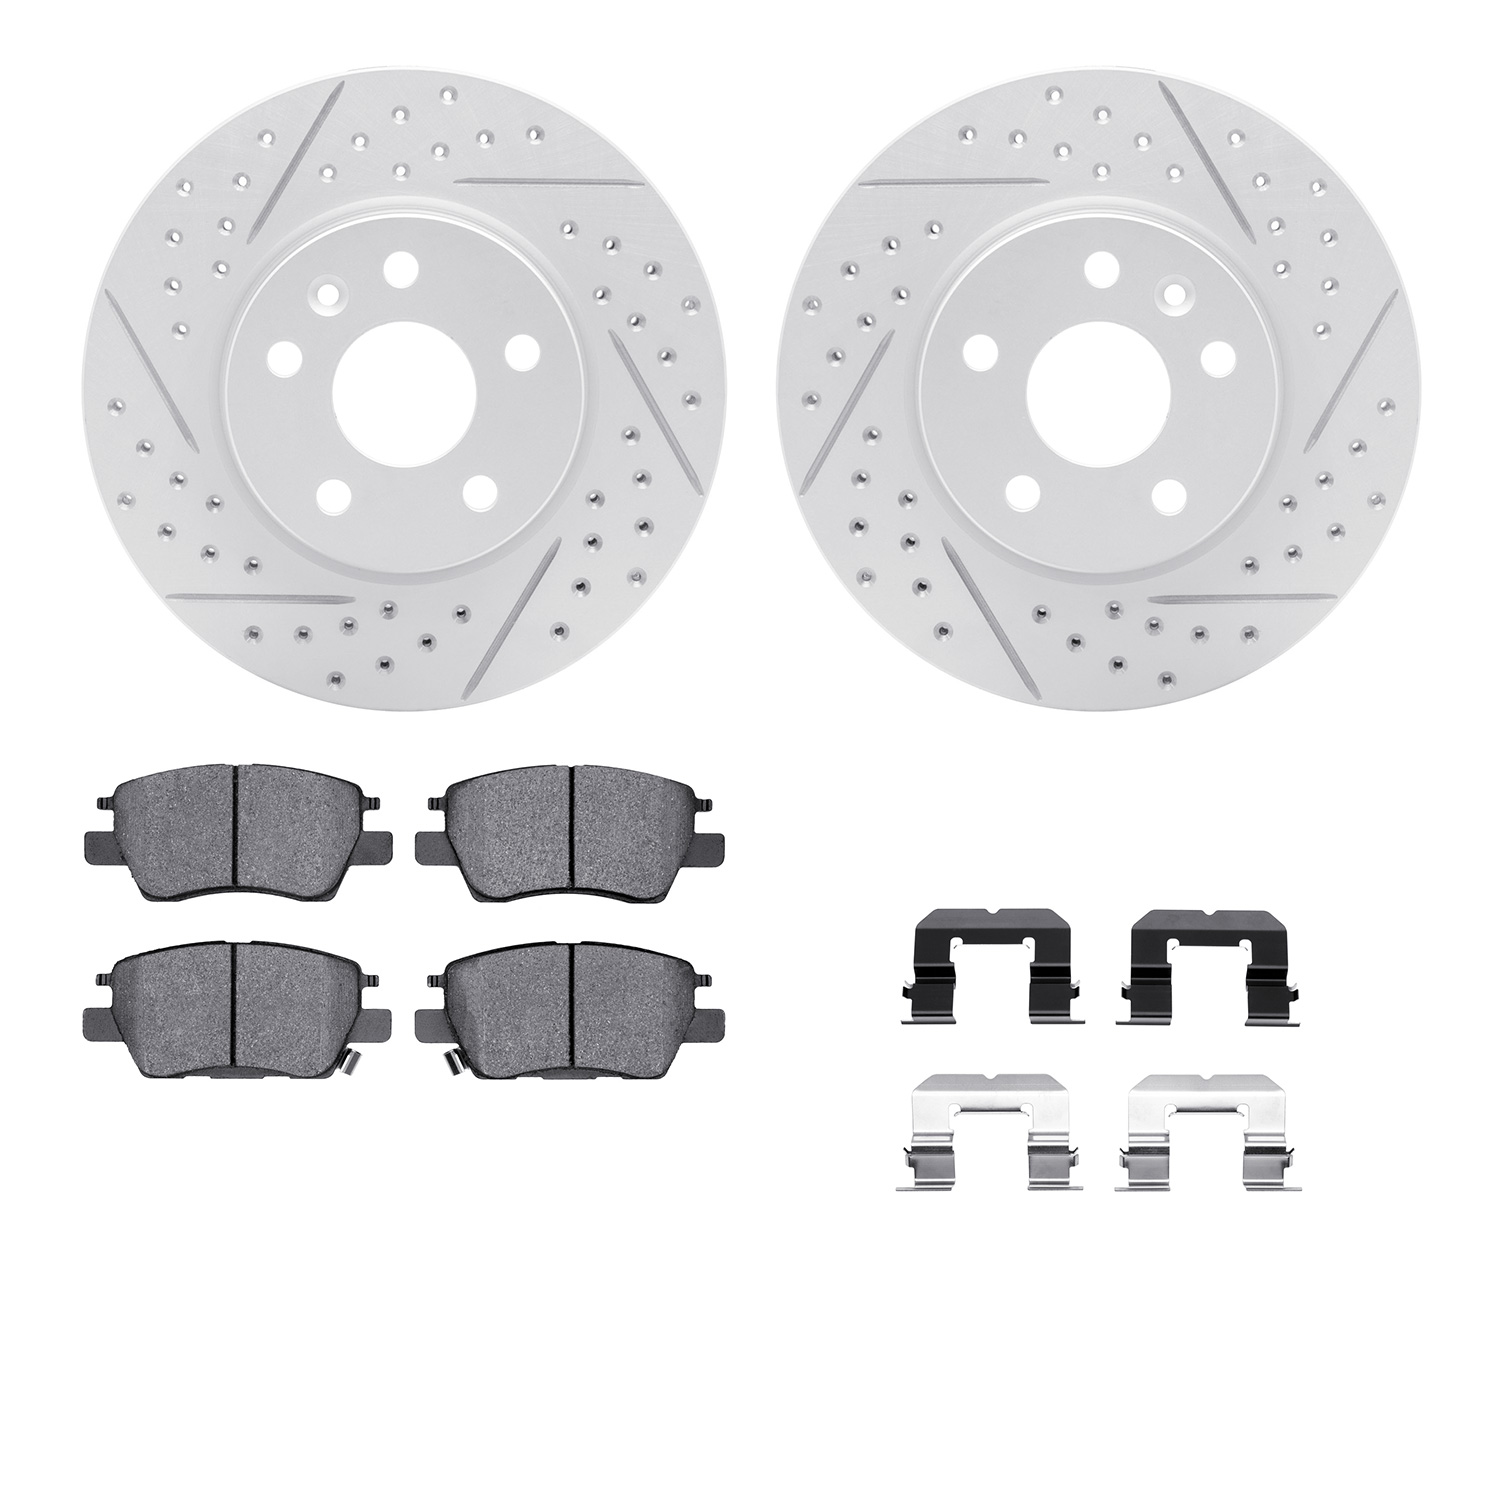 2512-47023 Geoperformance Drilled/Slotted Rotors w/5000 Advanced Brake Pads Kit & Hardware, Fits Select GM, Position: Front